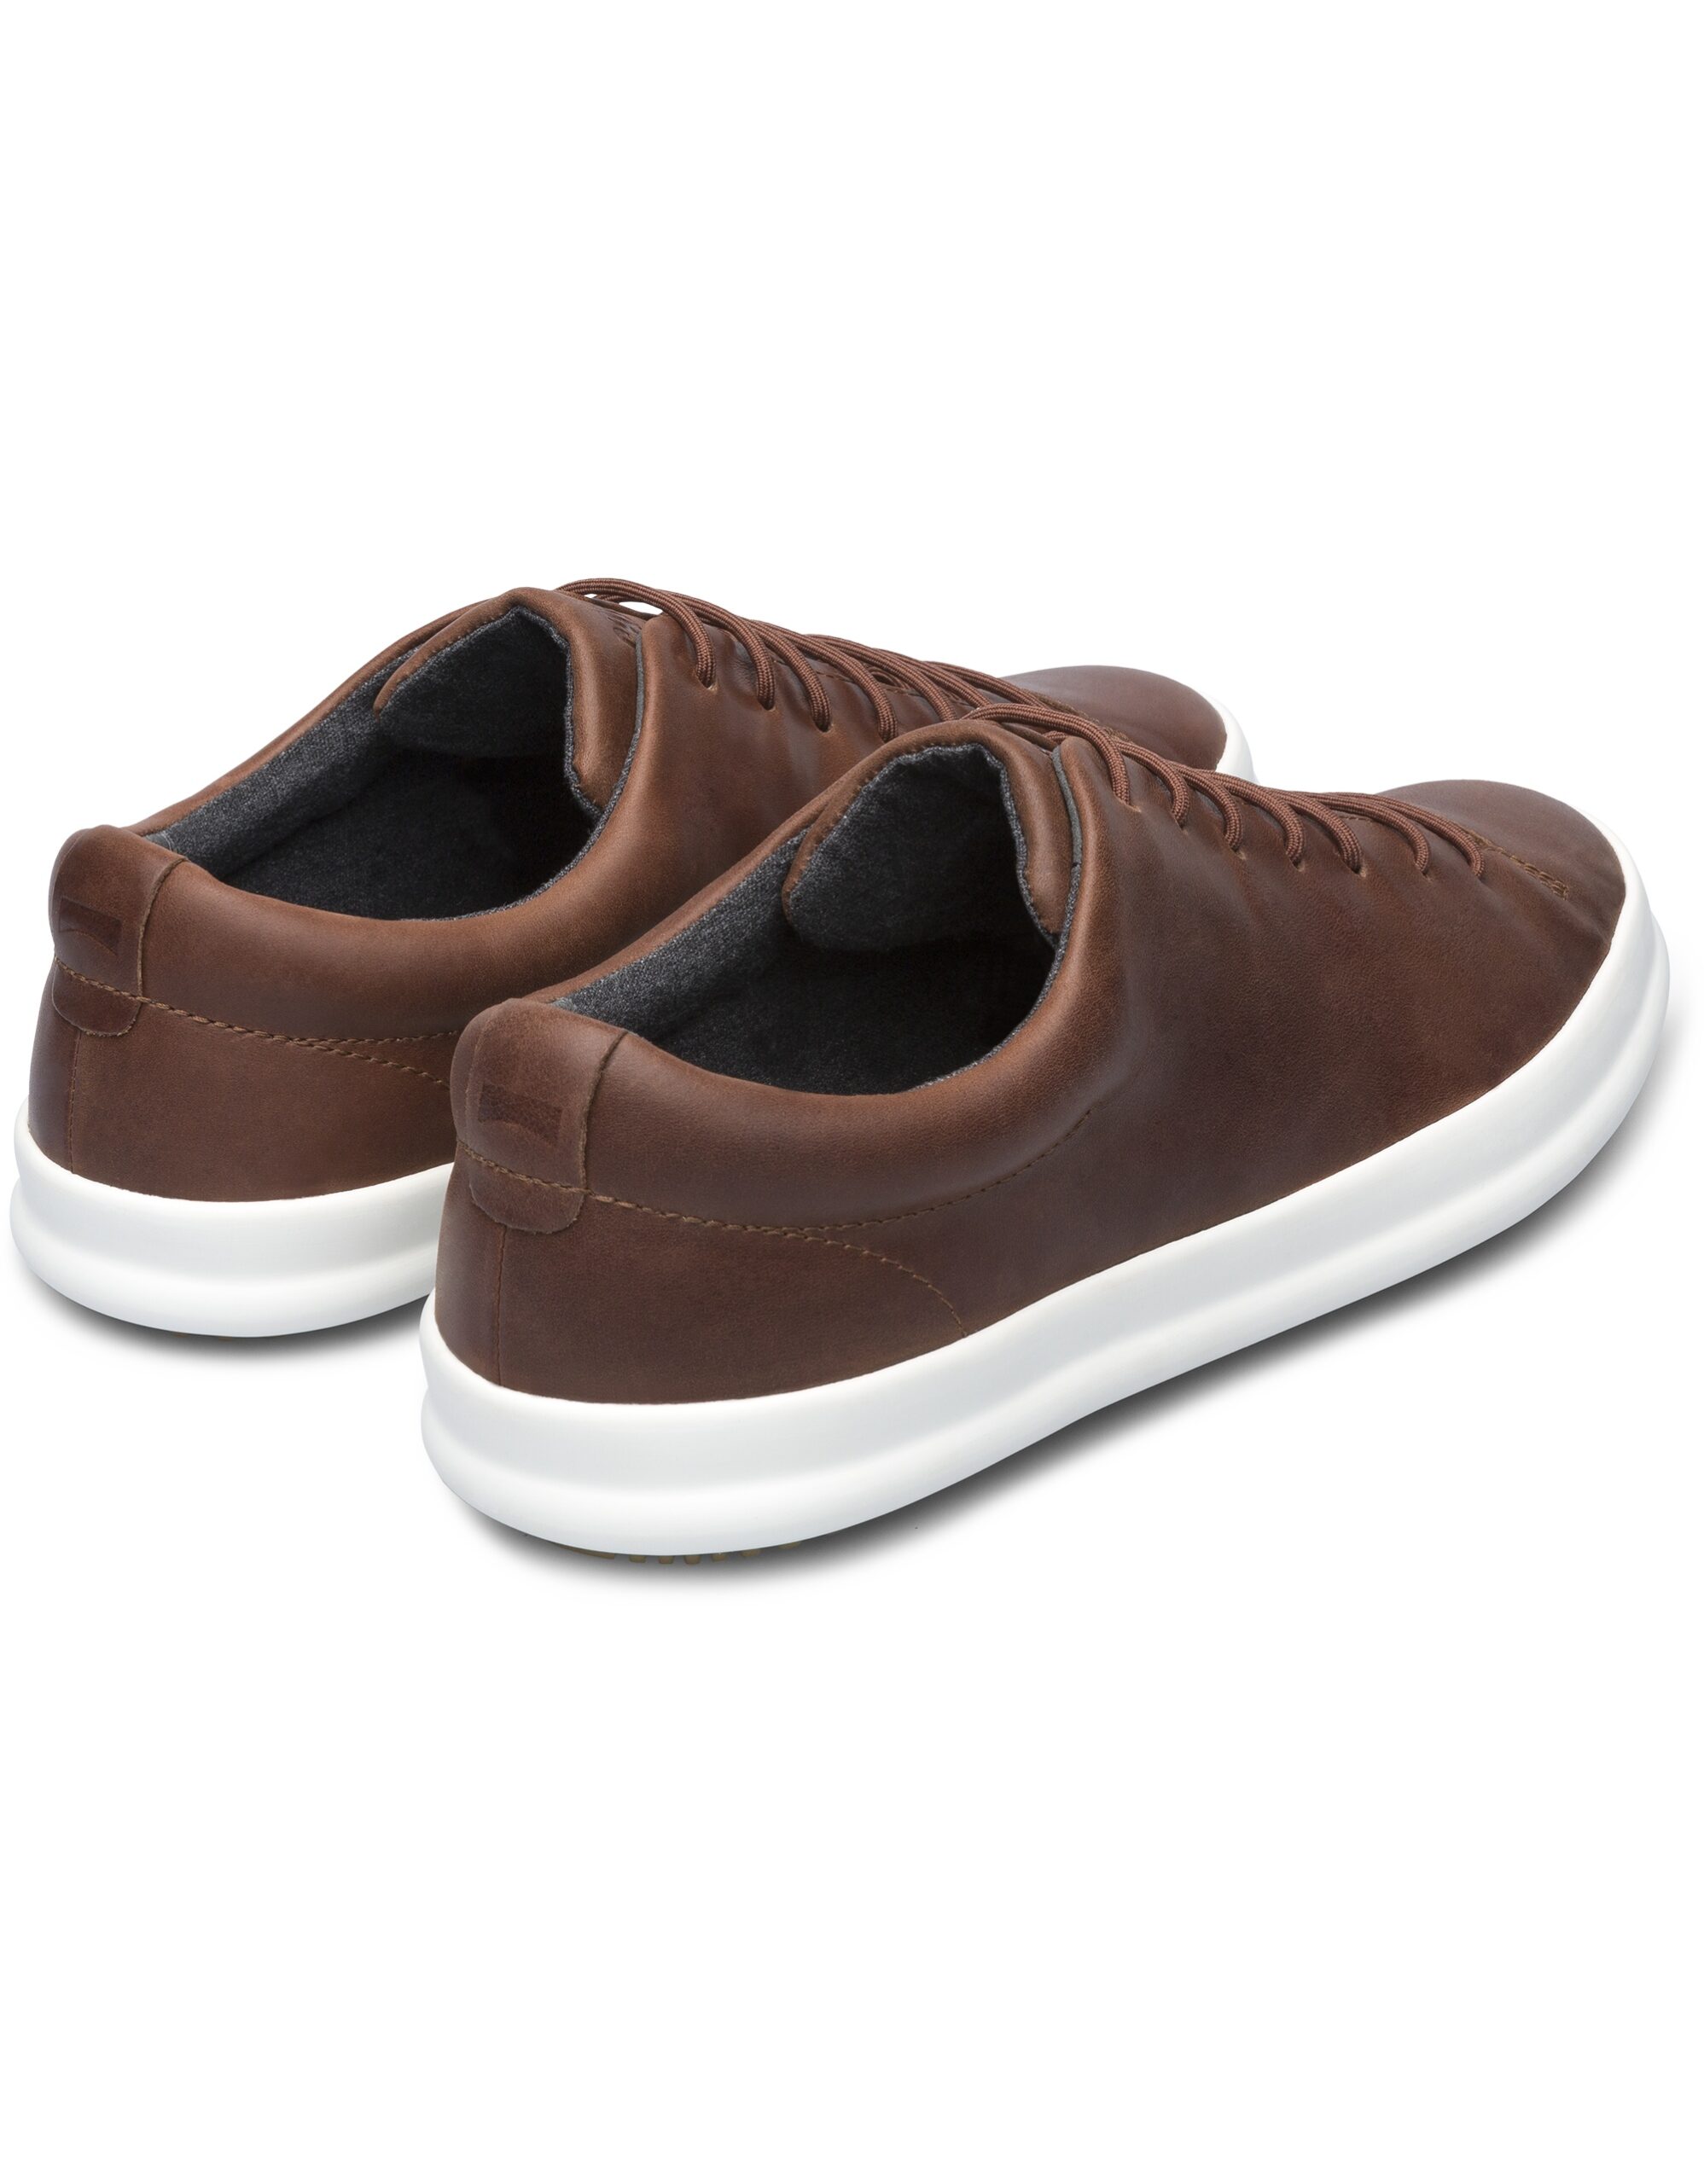 Camper – K100373-023 Chasis Sport Brown Mens Leather Lace Up Trainer ...